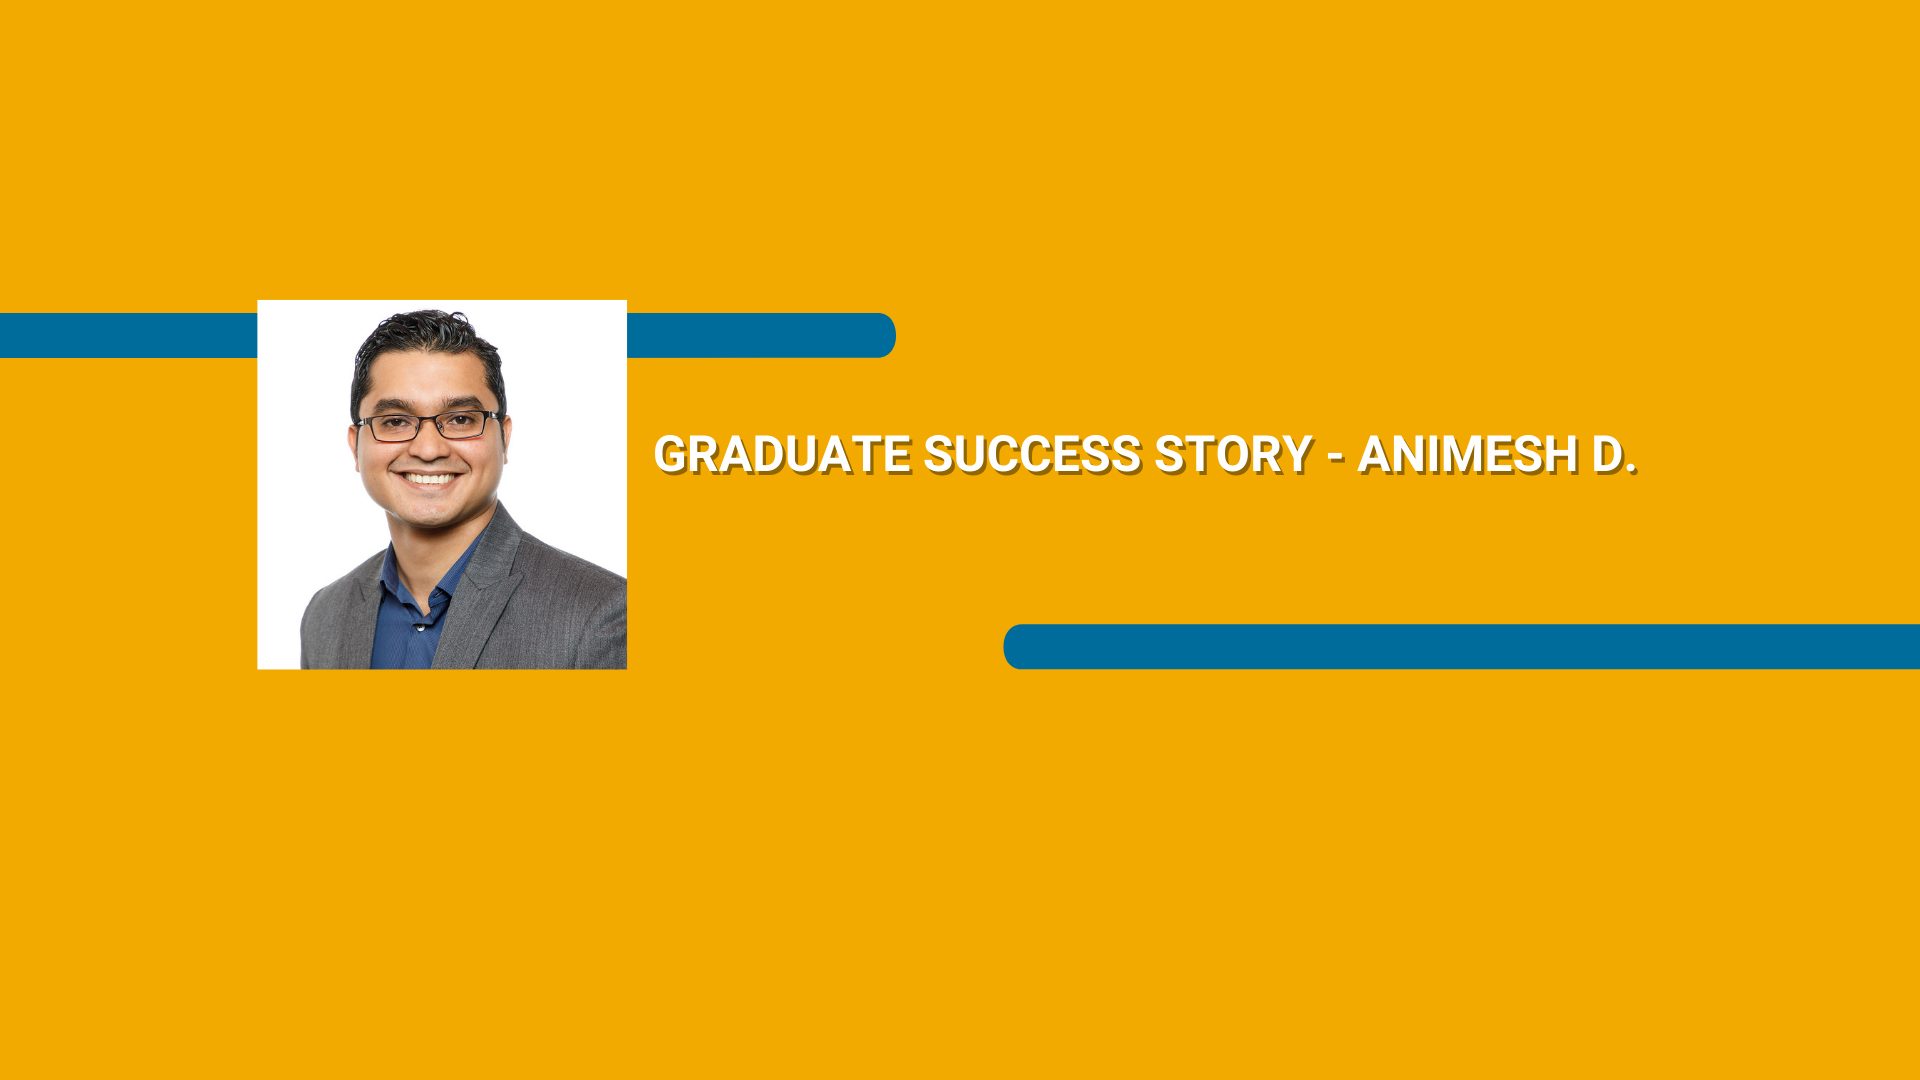 Orange rectangle with a picture of a man wearing a suit and Graduate Success Story - Animesh D. text in white font